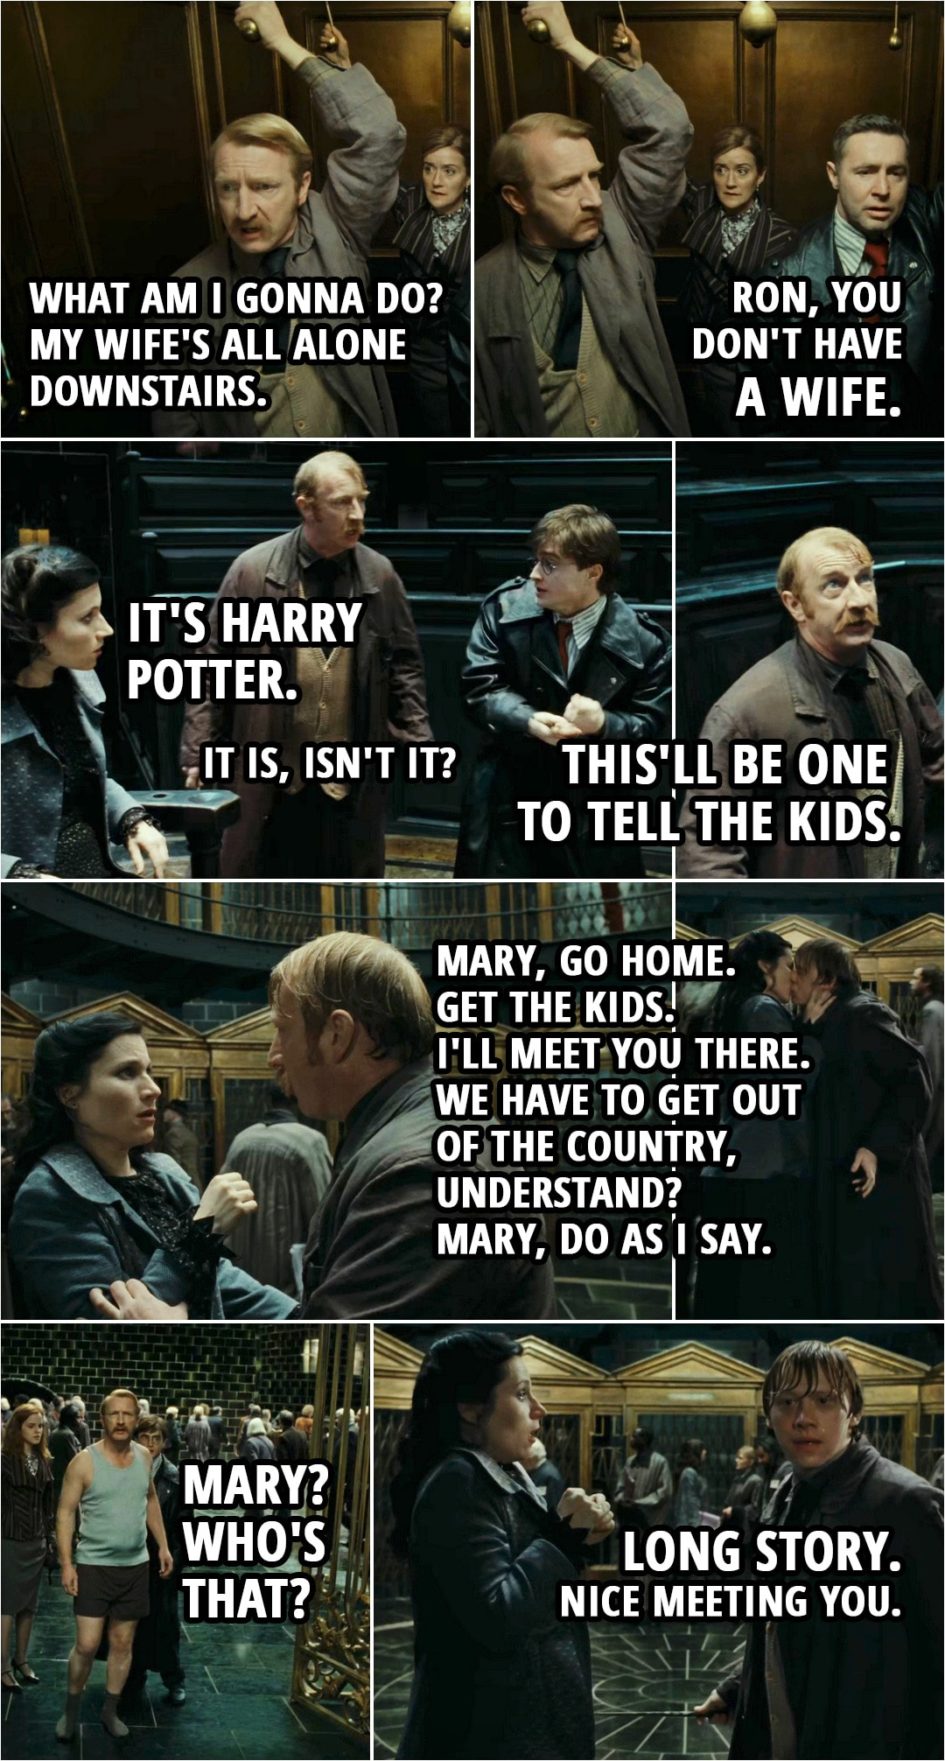 Quote from Harry Potter and the Deathly Hallows: Part 1 (2010) | (At the ministry, Ron as Cattermole...) Ron Weasley: Oh, my God. What am I gonna do? My wife's all alone downstairs. Harry Potter: Ron, you don't have a wife. Ron Weasley: Oh, right. (At the court room...) Mary Cattermole: It's Harry Potter. Ron Weasley: It is, isn't it? This'll be one to tell the kids. (Running from the ministry...) Ron Weasley: Mary, go home. Get the kids. I'll meet you there. We have to get out of the country, understand? Mary, do as I say. (Mary kisses him and Ron turns back into himself... the real Cattermole shows up...) Reginald Cattermole: Mary? Who's that? Ron Weasley: Long story. Nice meeting you.